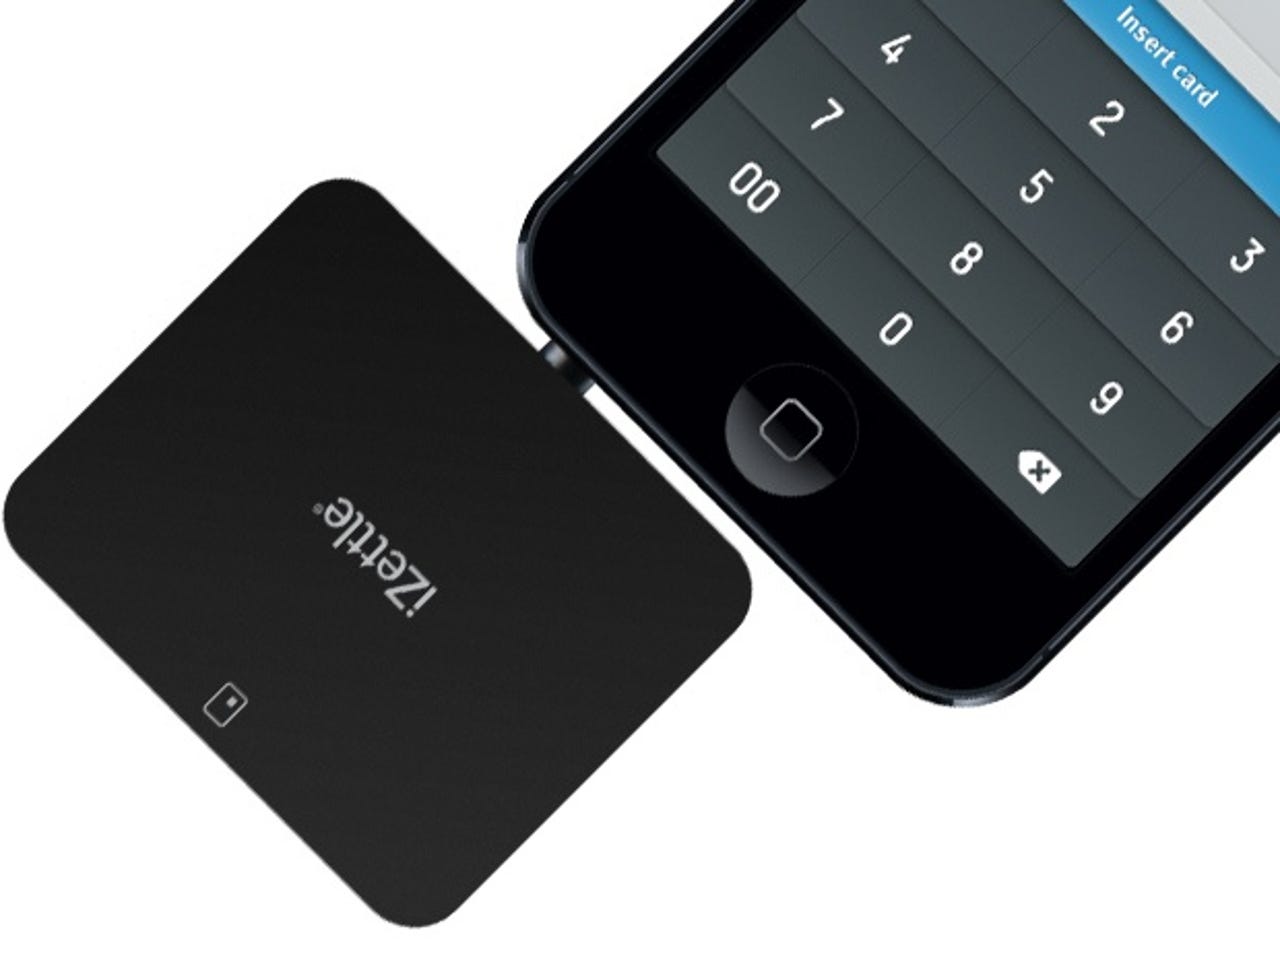 izettle-launches-square-style-mobile-payments-in-the-uk